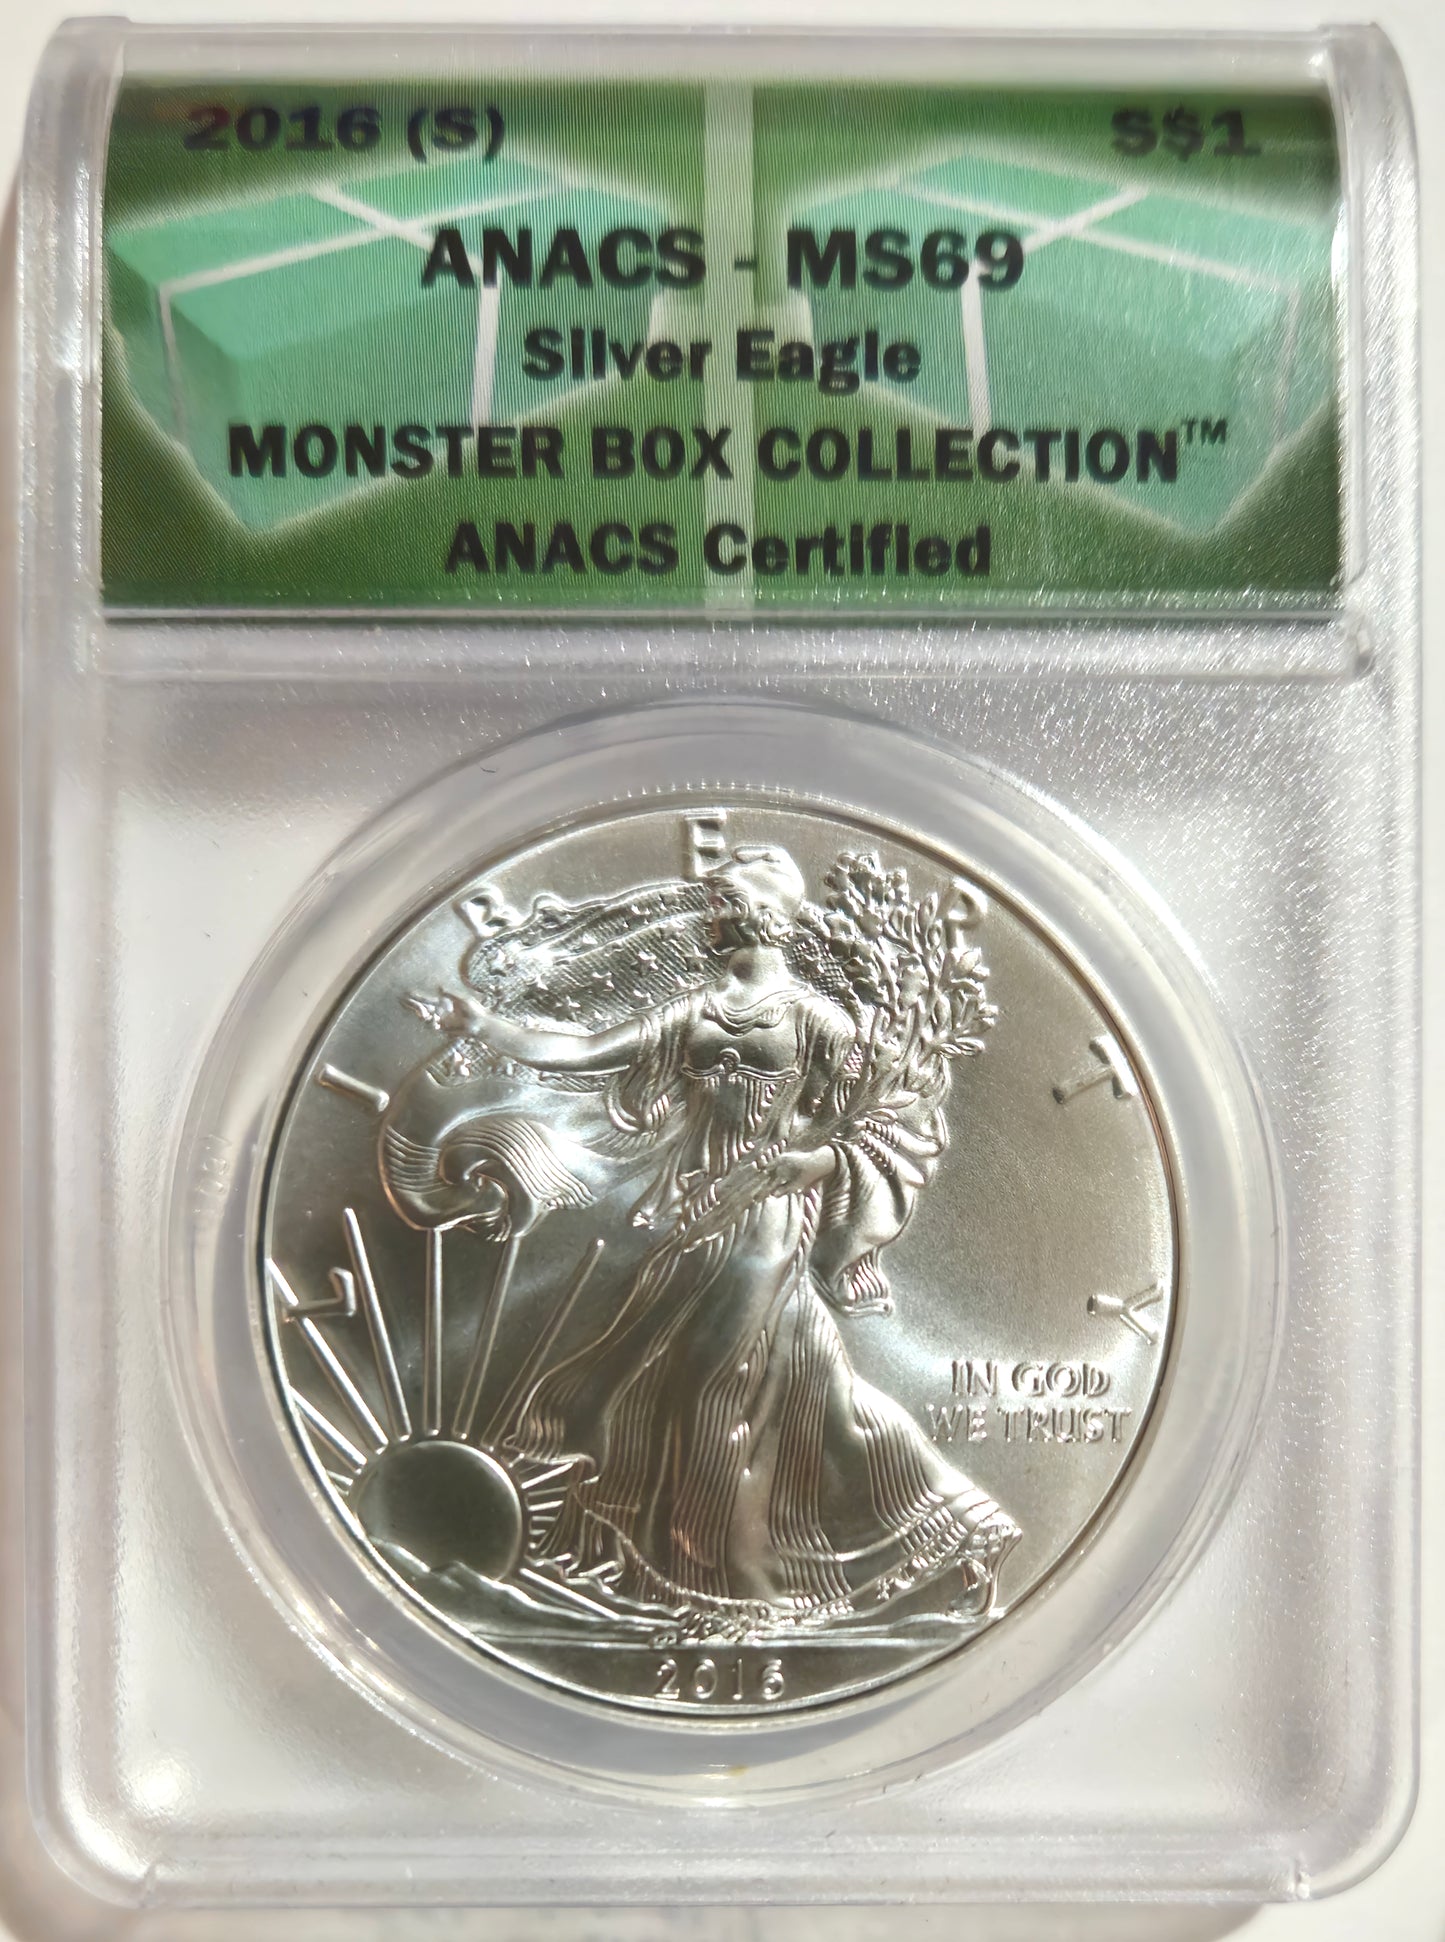 2016-(S) Silver Eagle  ANACS MS69  Monster Box Collection 30th Anniversary!!